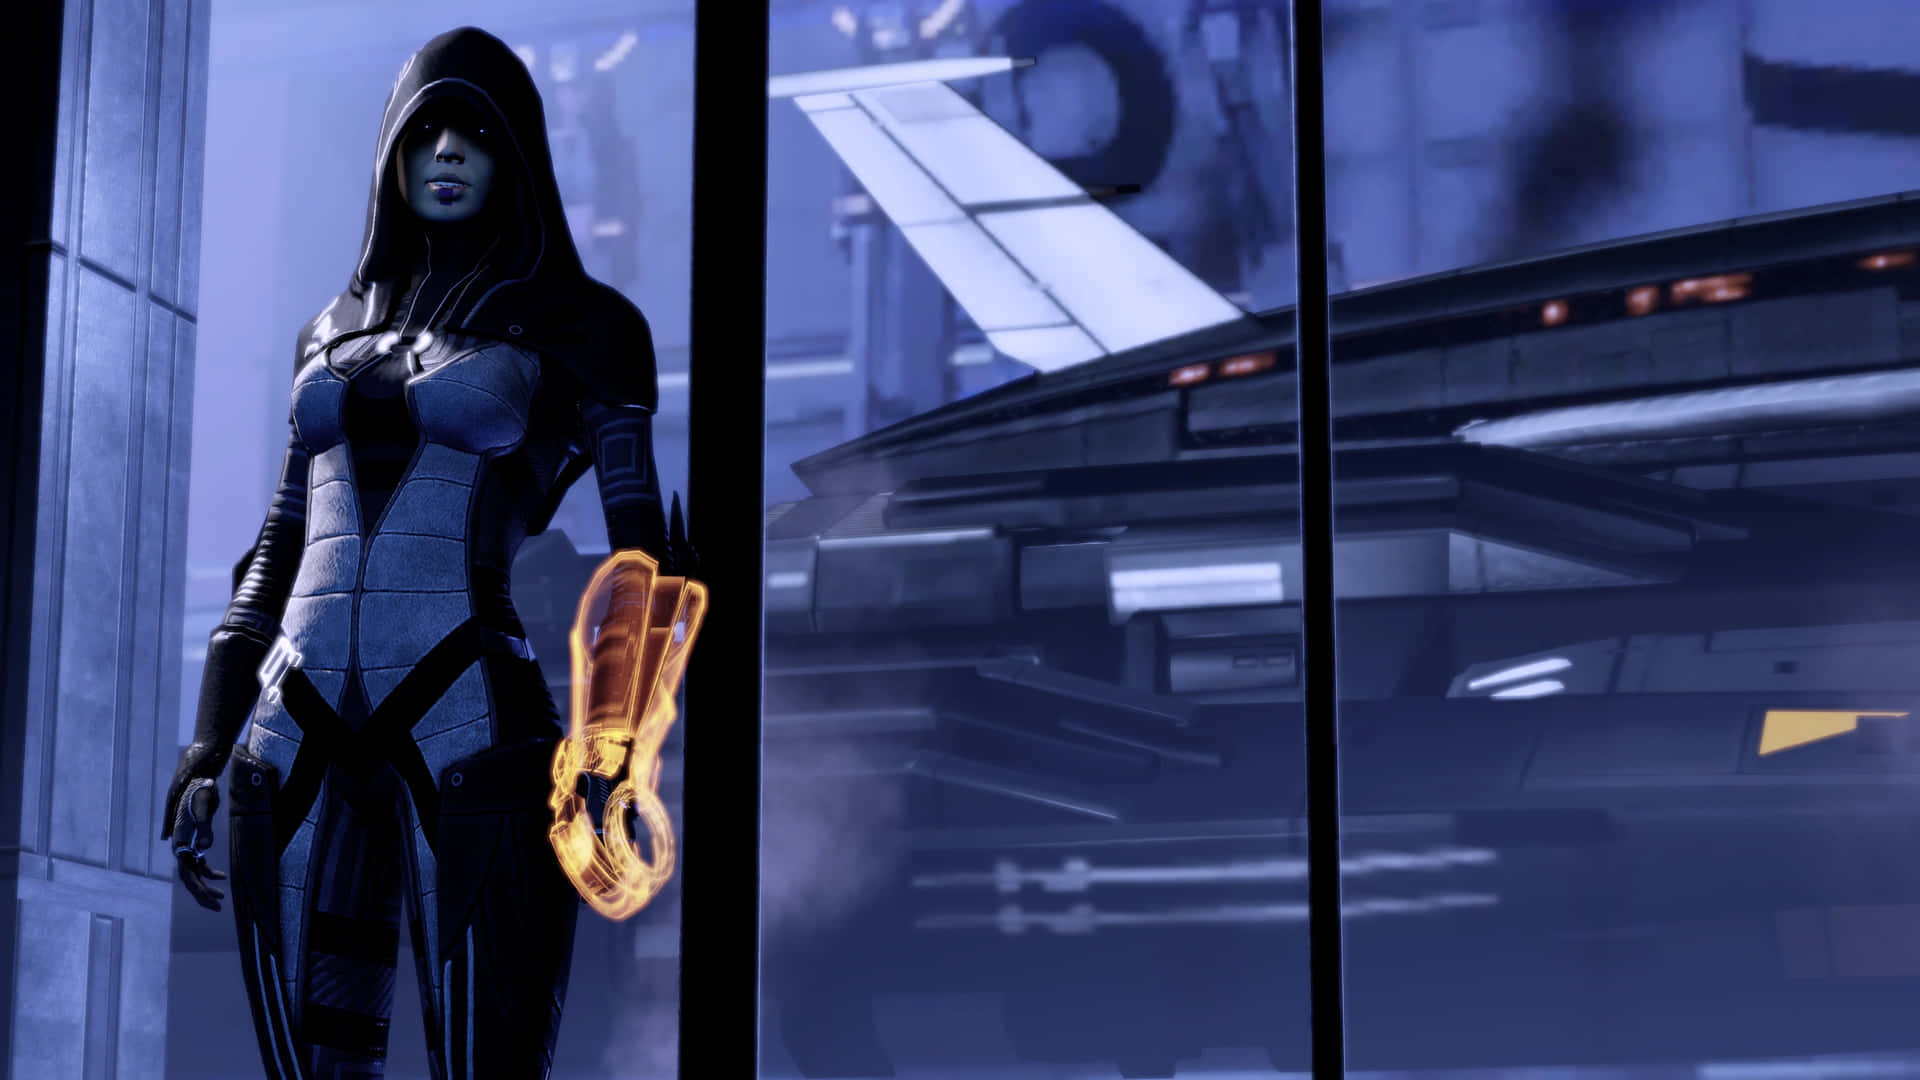 Caption: Kasumi Goto in action, master thief of the Mass Effect universe Wallpaper